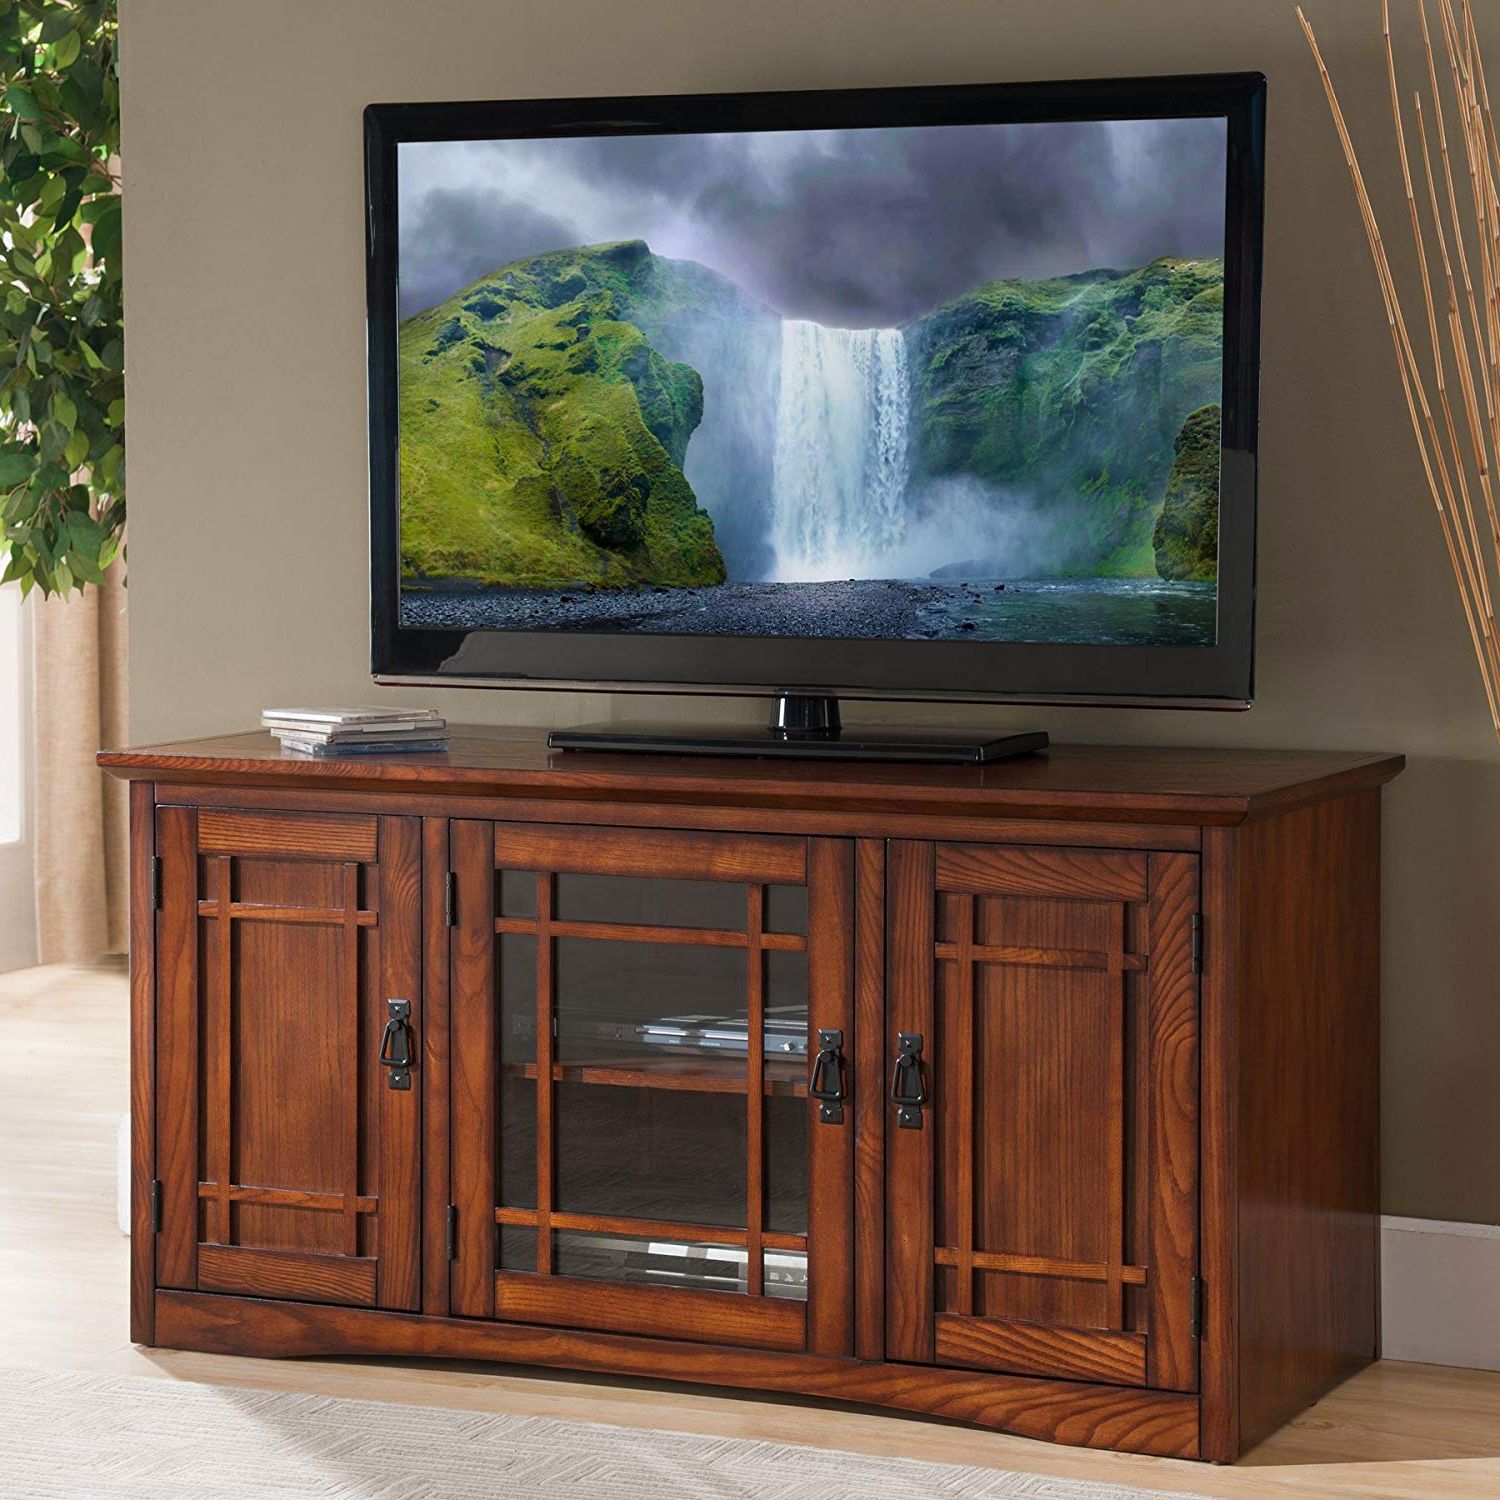 Leick Home Tv Stand – From $323.7300 To $494.6600 | Ojcommerce Within Tv Stands (Gallery 16 of 21)